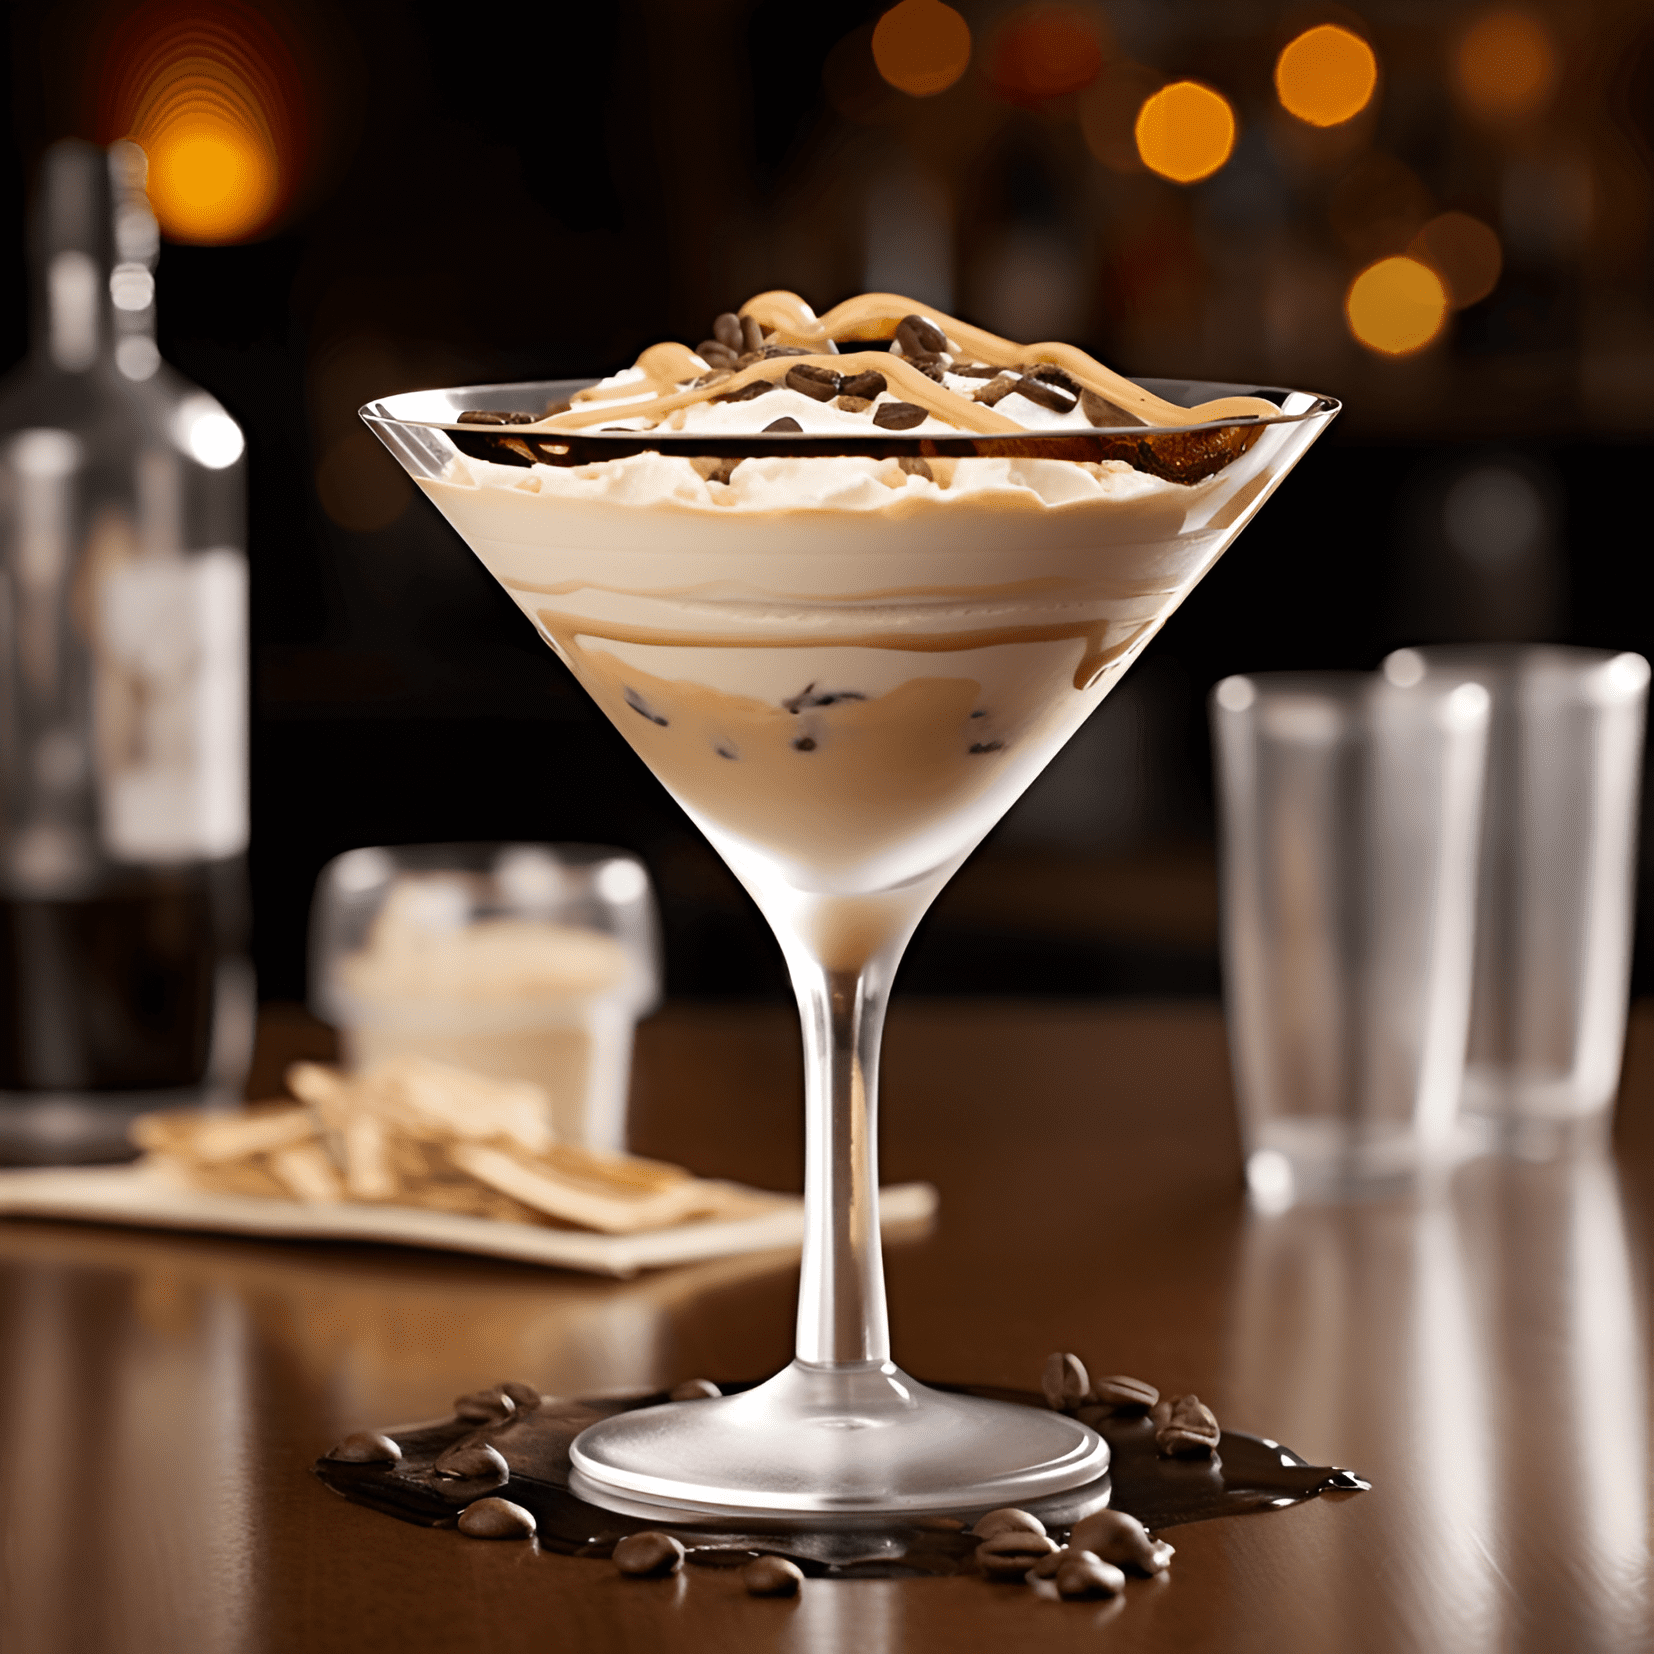 The Heath Bar cocktail has a rich, creamy, and sweet taste with a hint of toffee and chocolate. It's smooth and velvety, with a slight warmth from the alcohol.